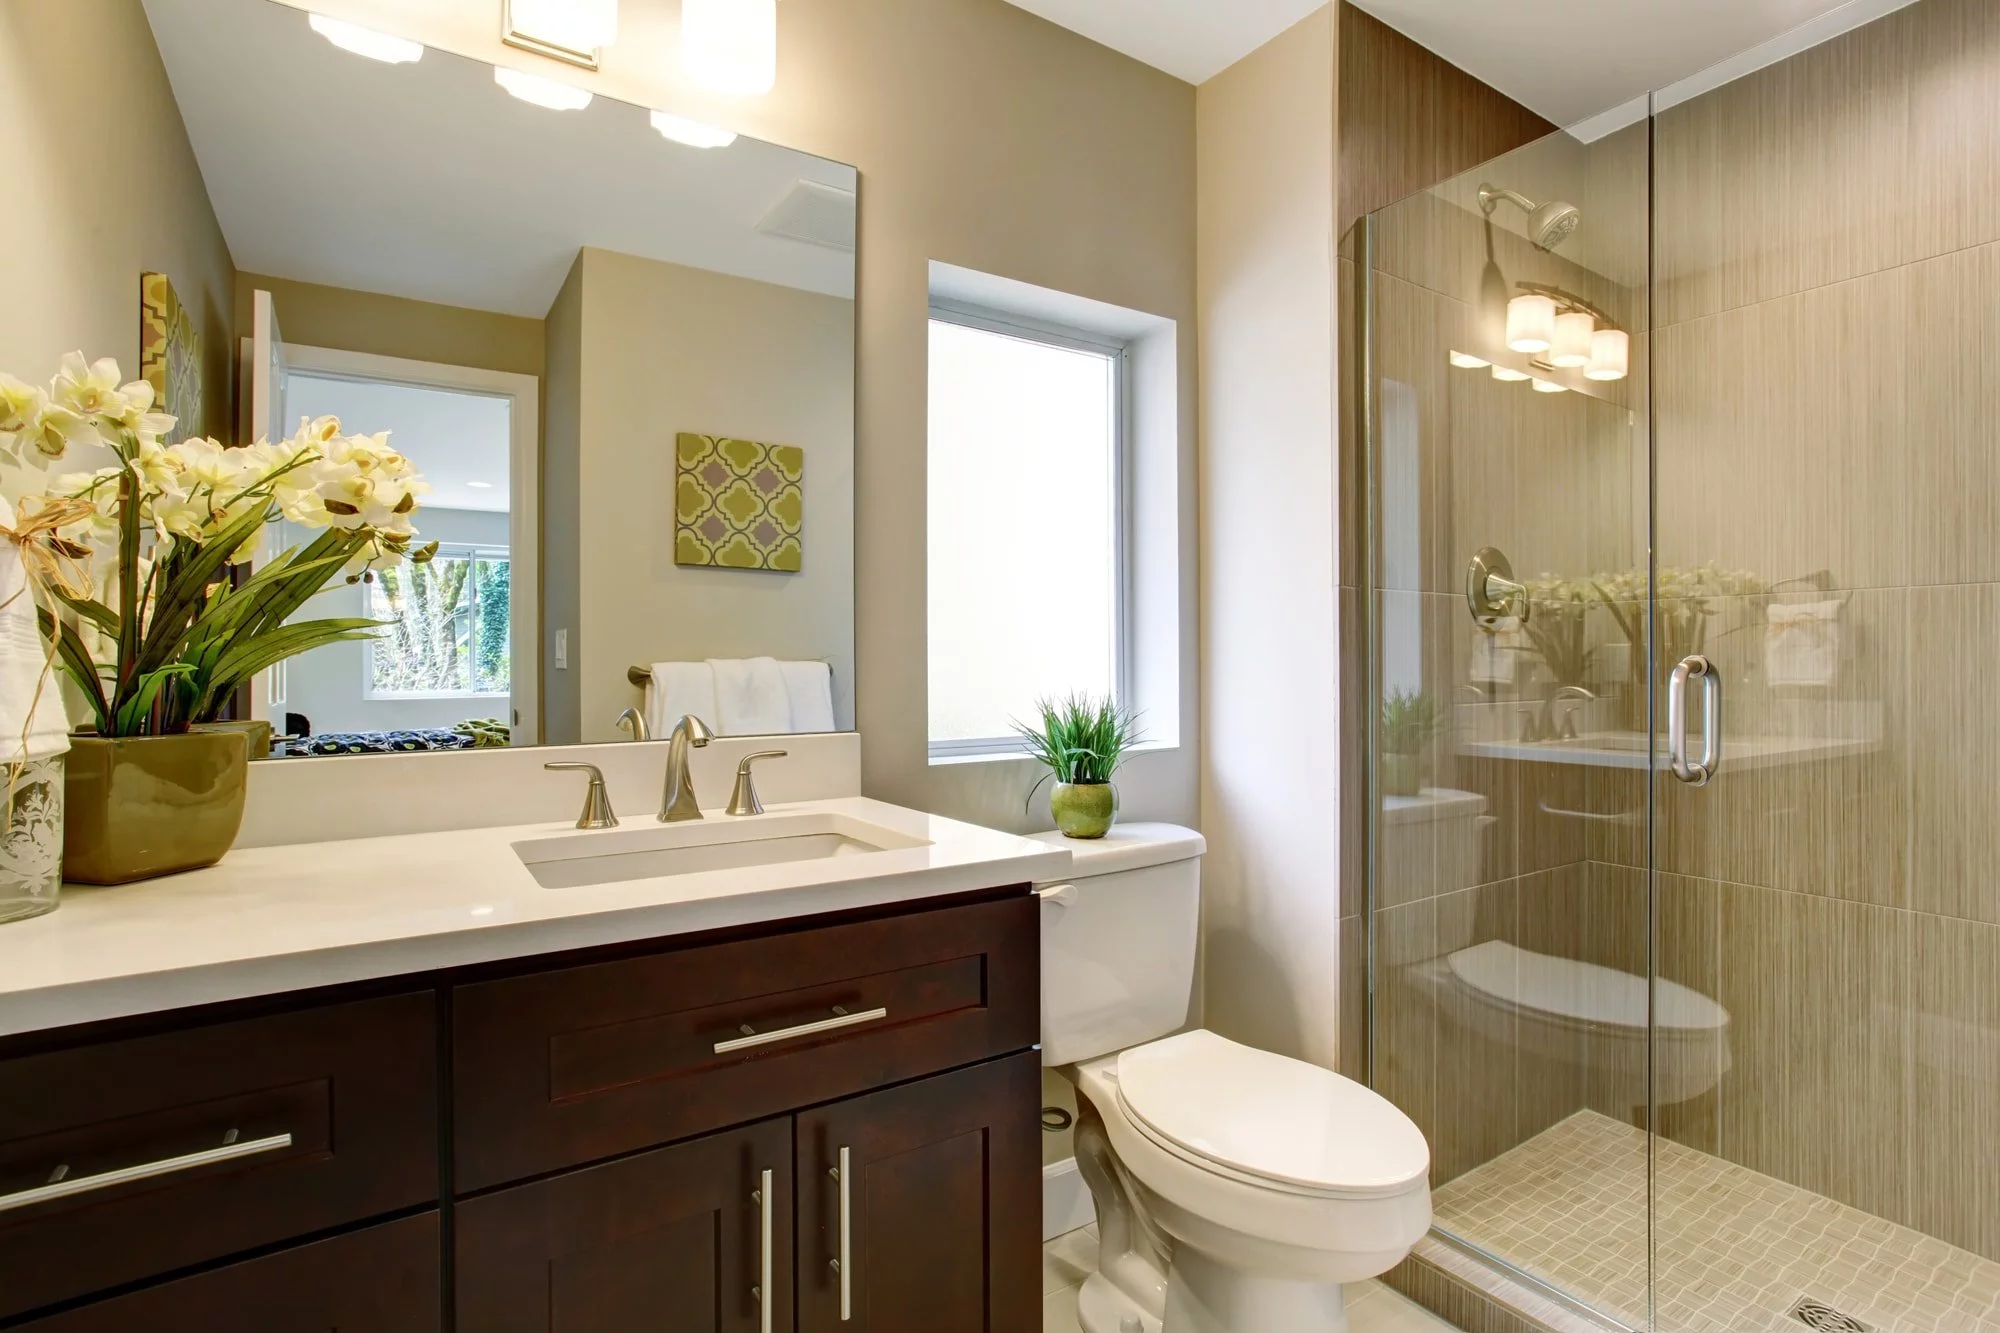 Tub to Shower Conversion: Everything You Need to Know